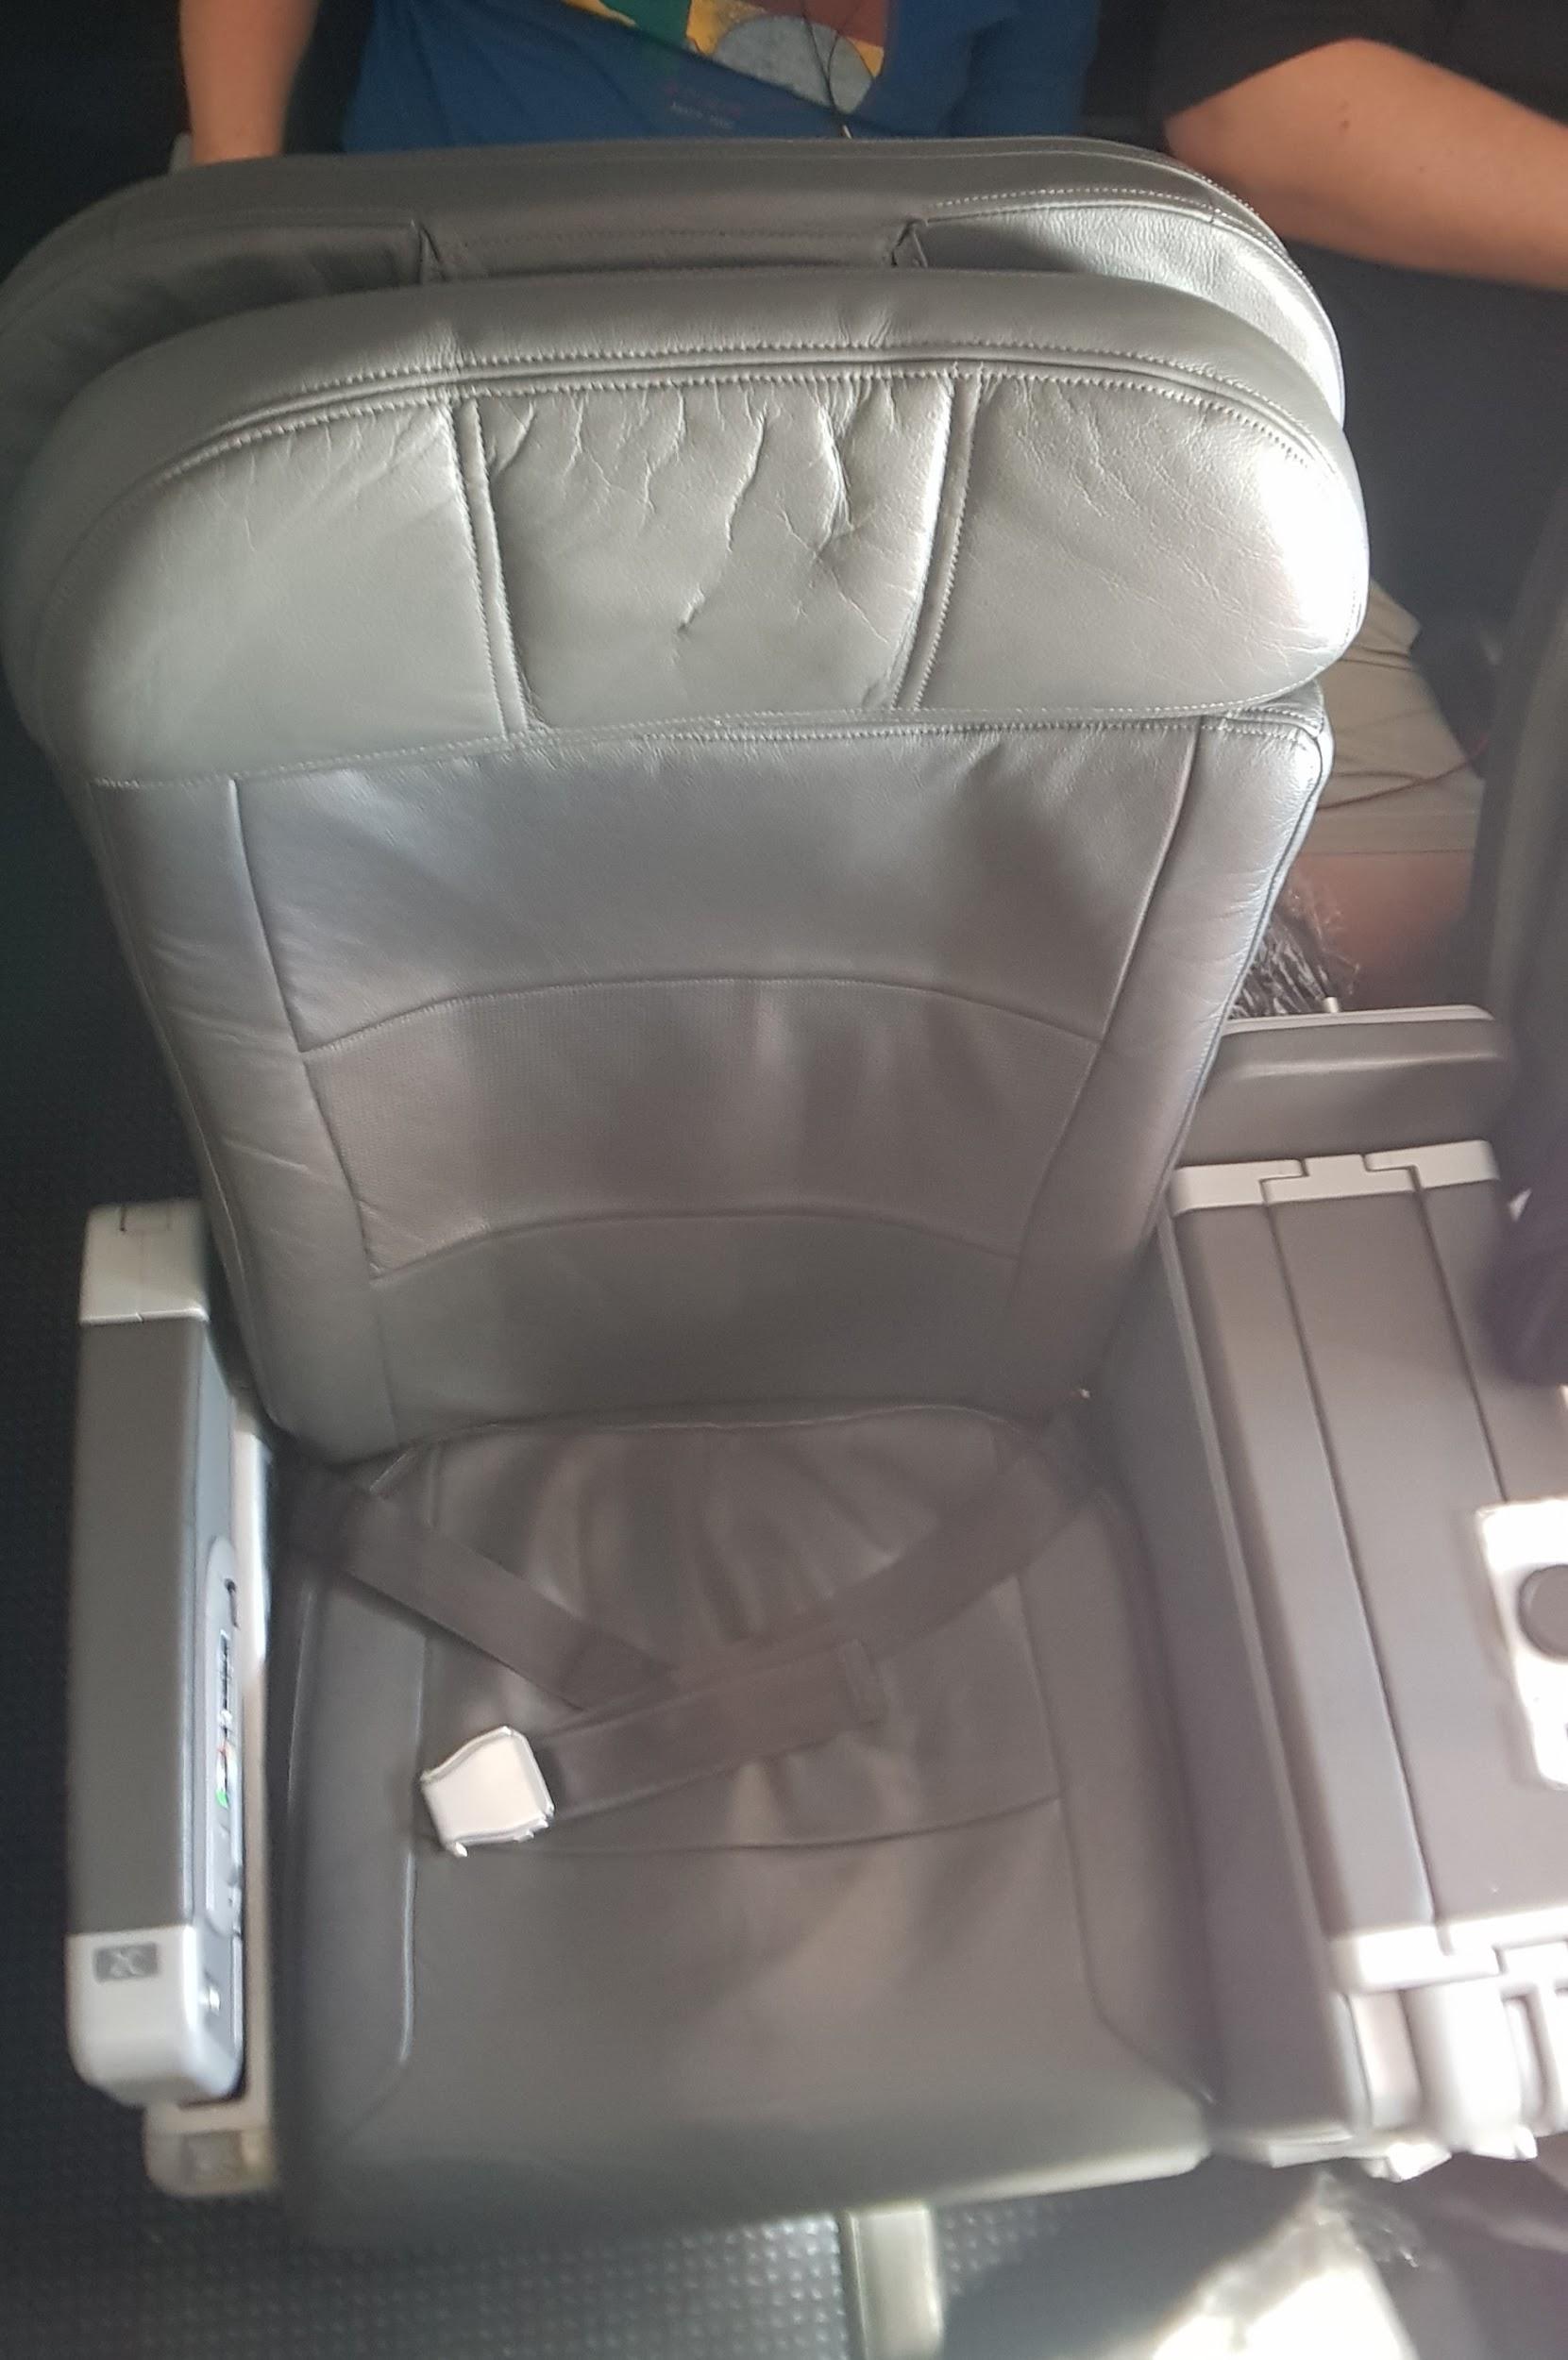 American Airlines Domestic Business Class